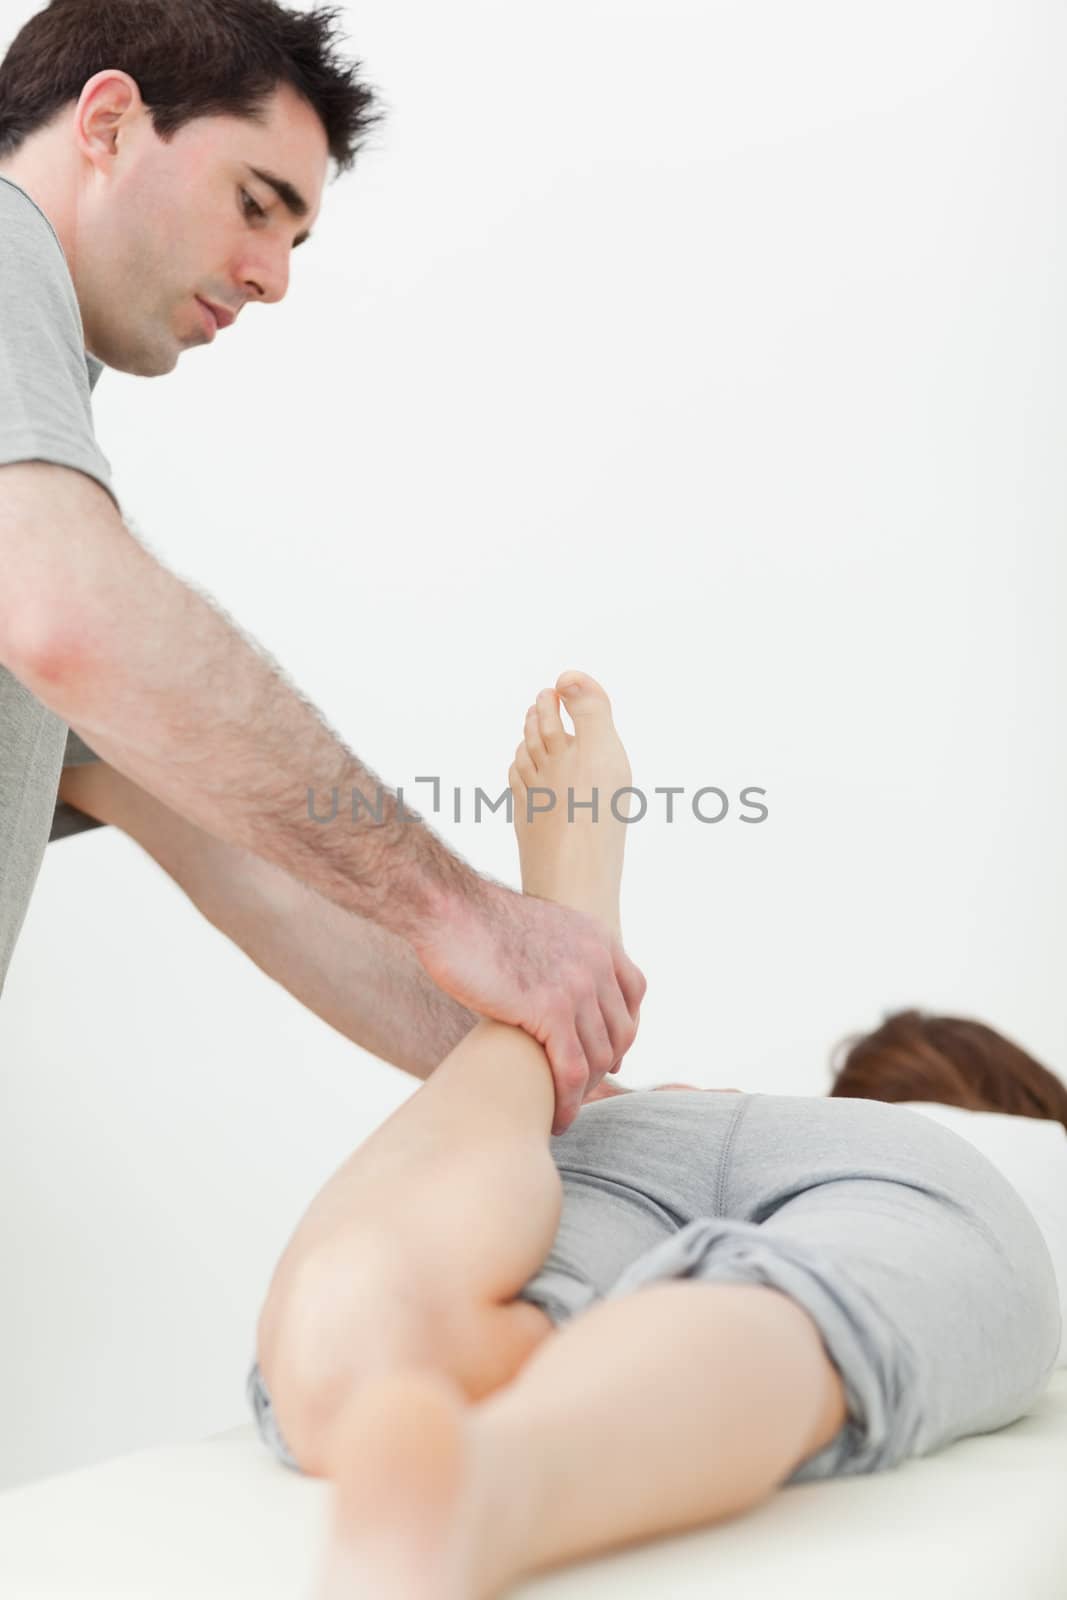 Serious physiotherapist manipulating the leg of a patient in a room